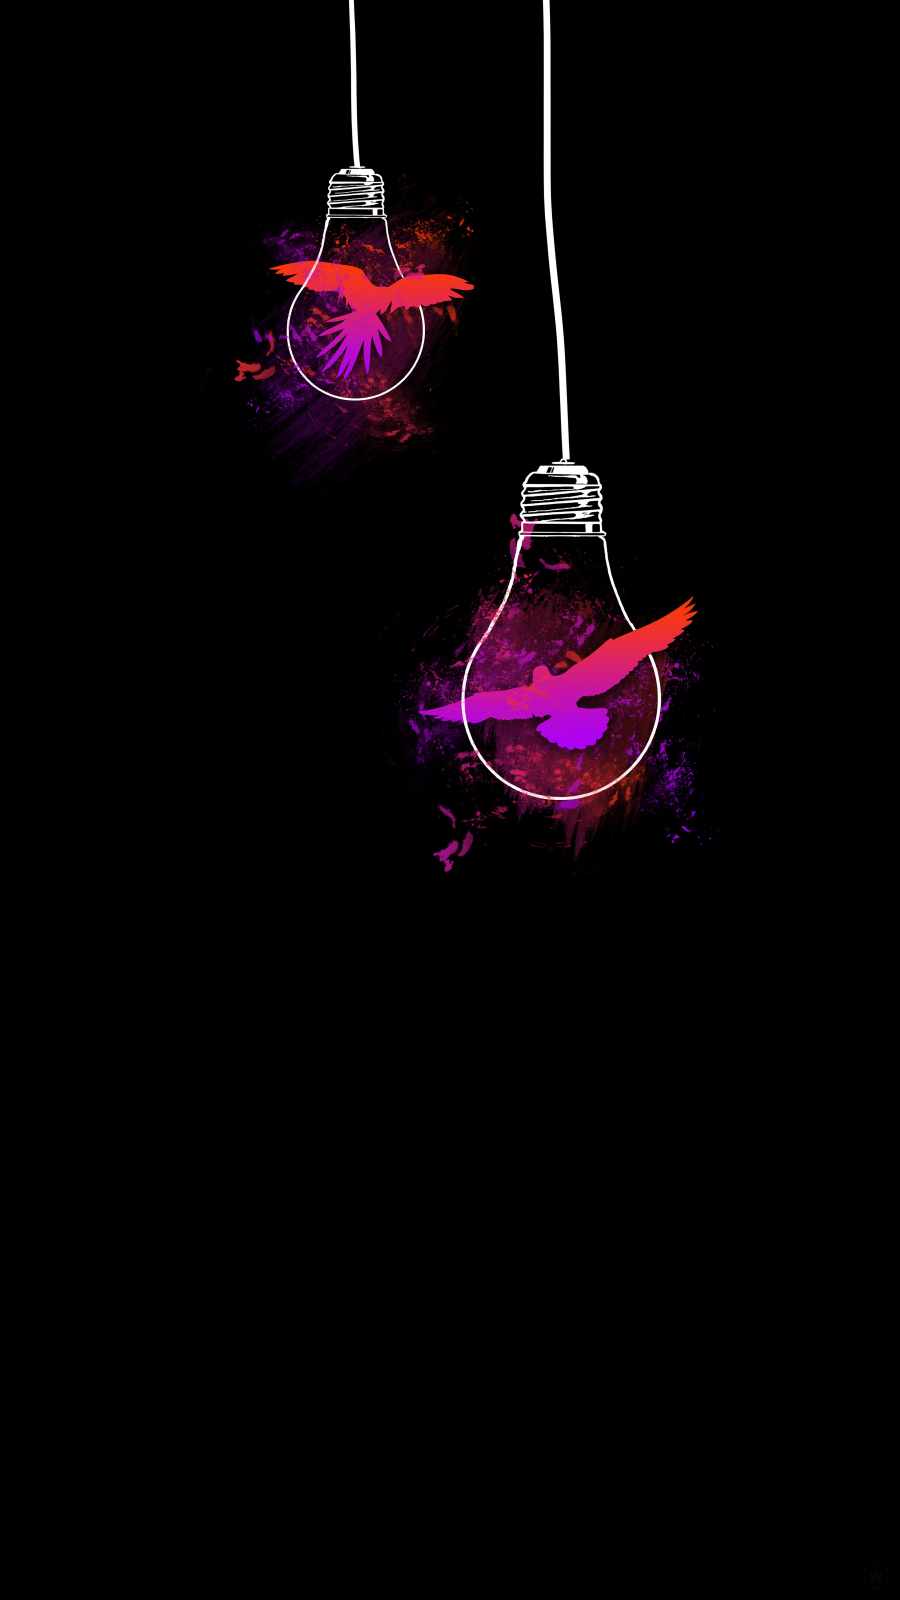 Amoled Bulb 4K IPhone Wallpaper - IPhone Wallpapers : iPhone Wallpapers